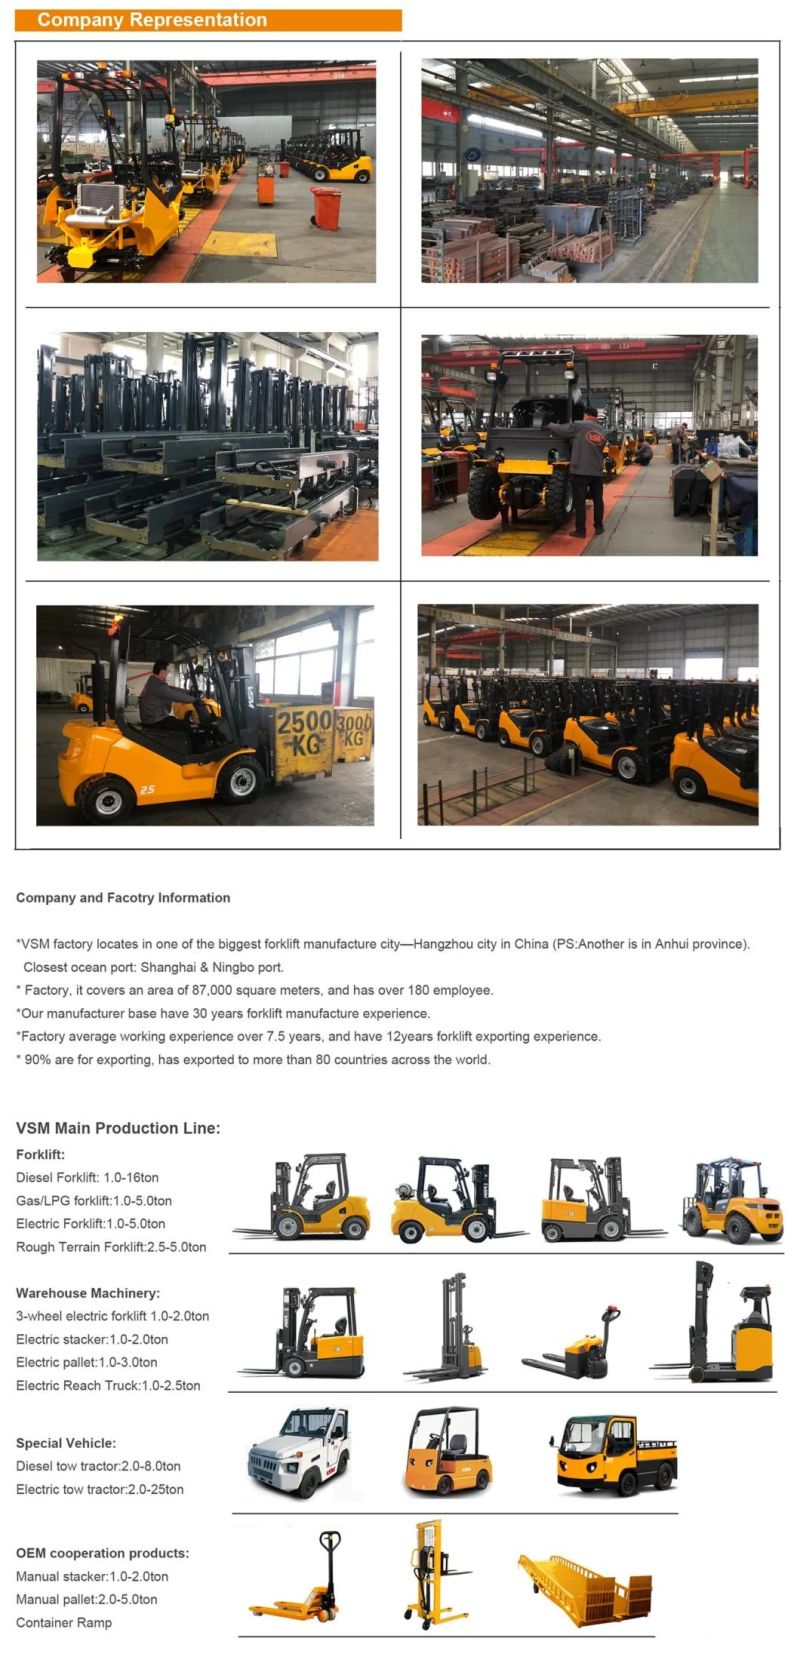 Fd35 Cpcd35 3.5ton Diesel Forklift with Automatic Transmission